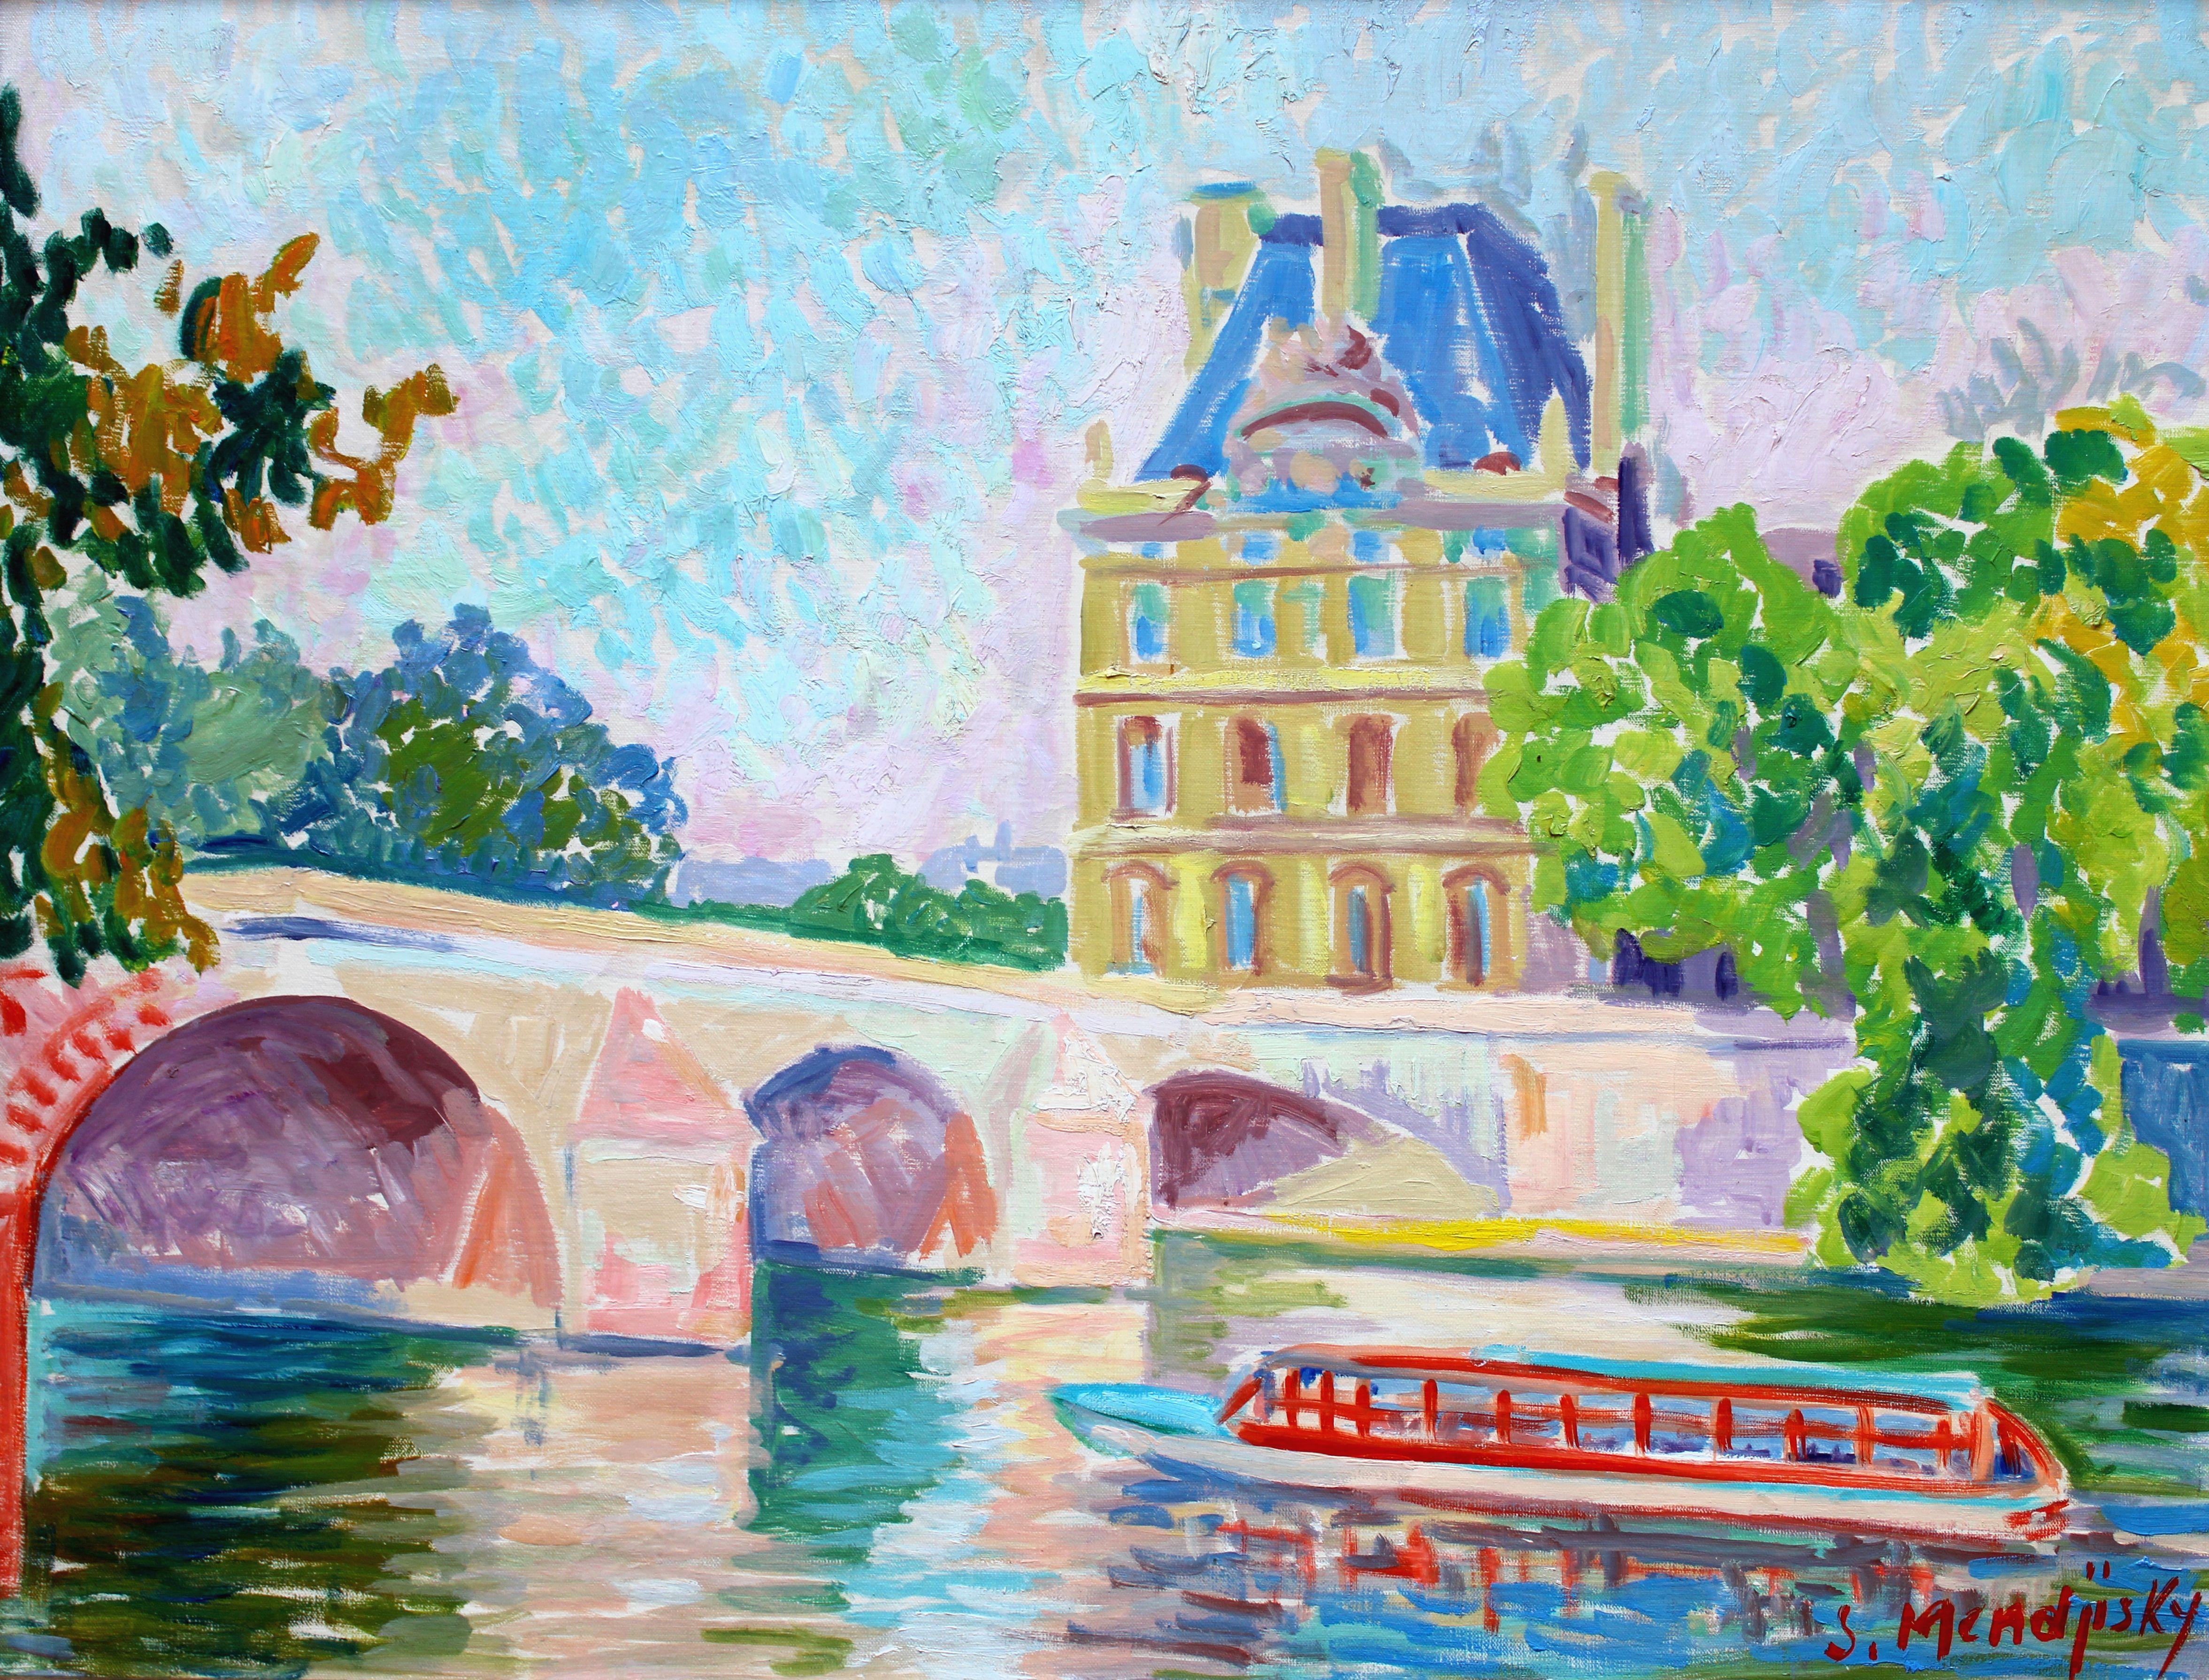 Serge Mendjisky Figurative Painting - The Seine at the Louvre. Oil on canvas, 50 x 65 cm